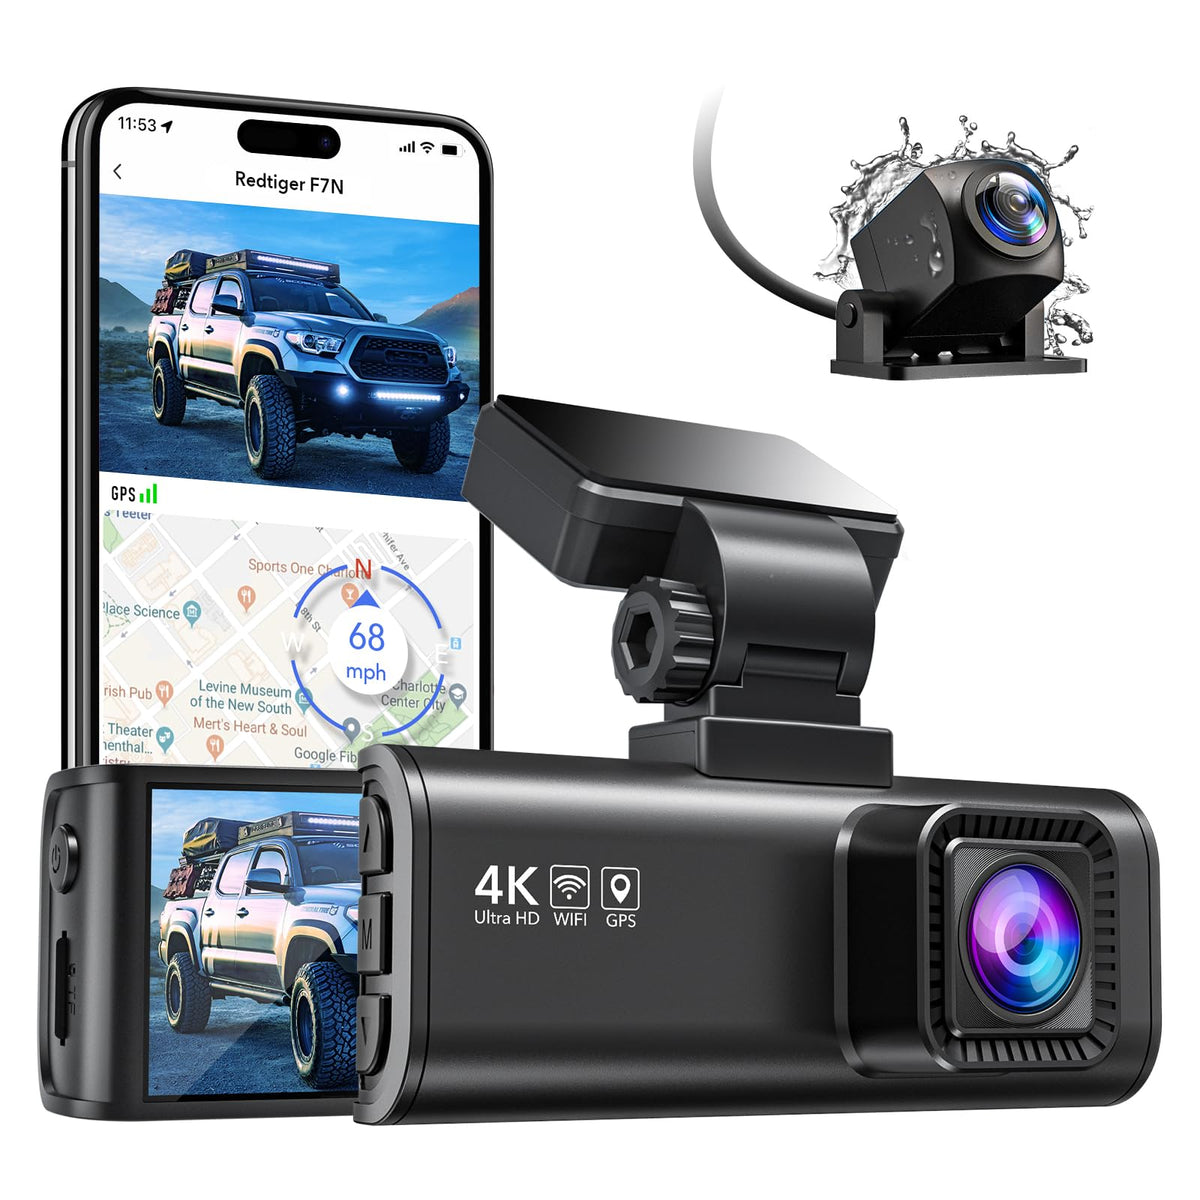 4K Dual Dash Cam 5G WiFi GPS, Real 4K+HDR 1080p Dash Cam Front and Rear, 3 LCD Super Night Vision, Parking Mode, Dash Camera for Cars with App, G